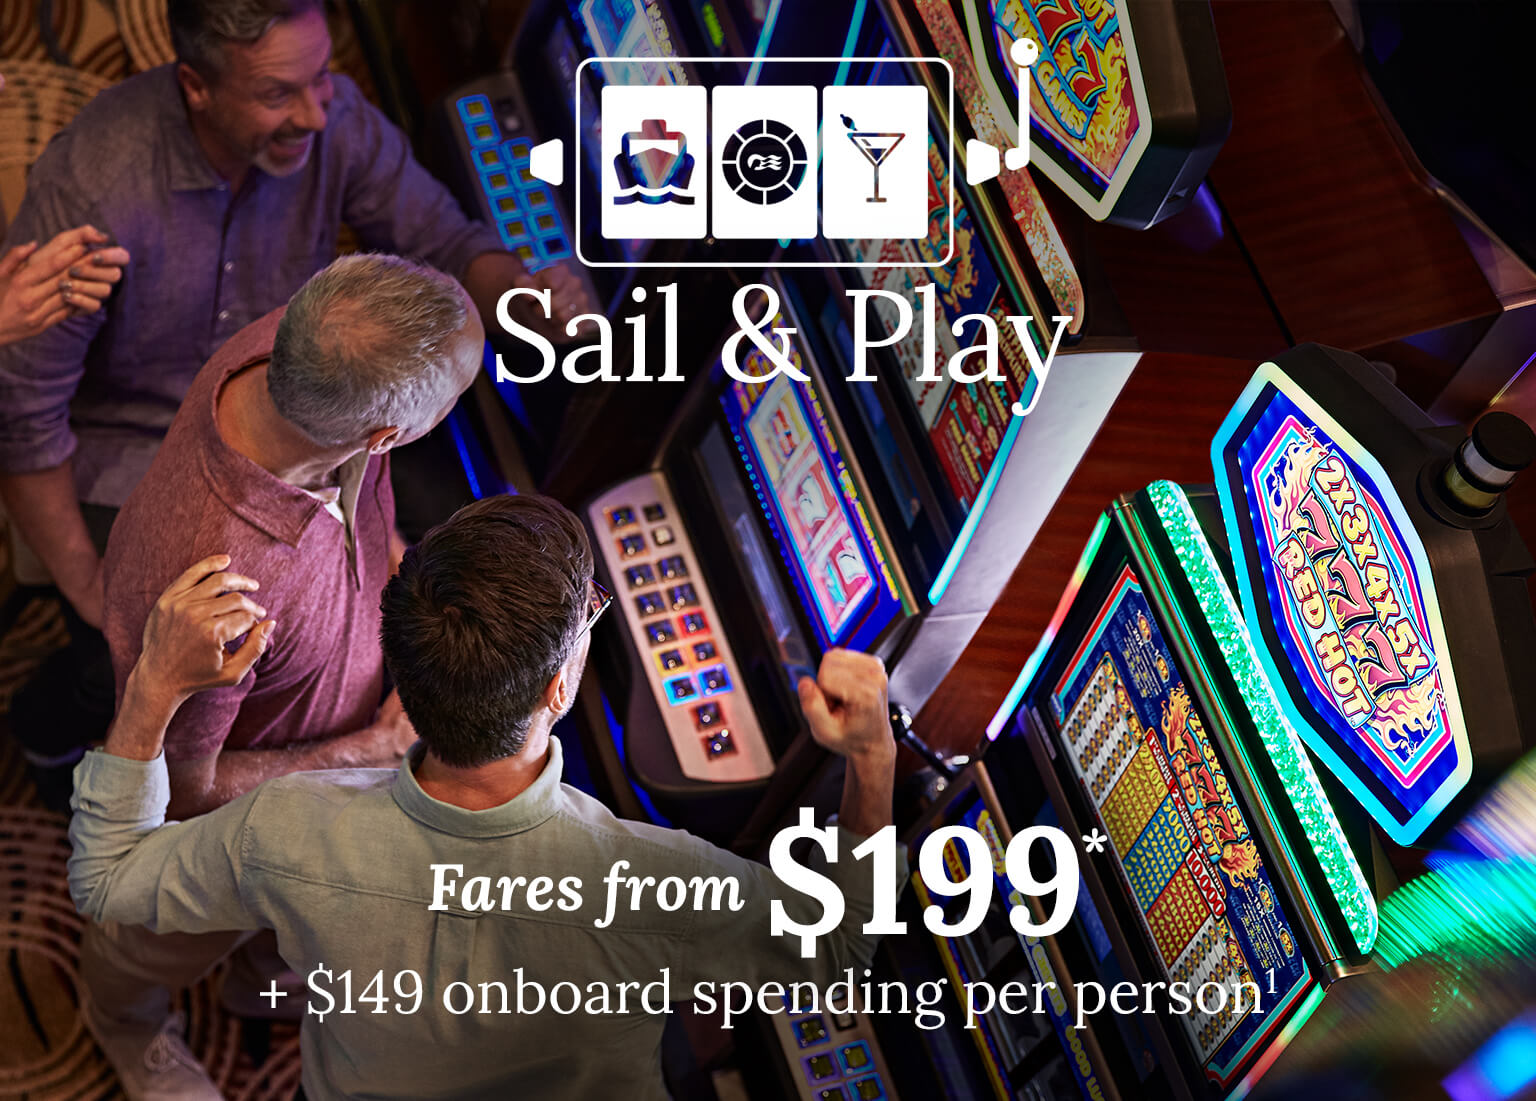 Group of people playing slots. fares from $199. $149 onboard spending per person on voyages 7 days or longer. Click here to book.